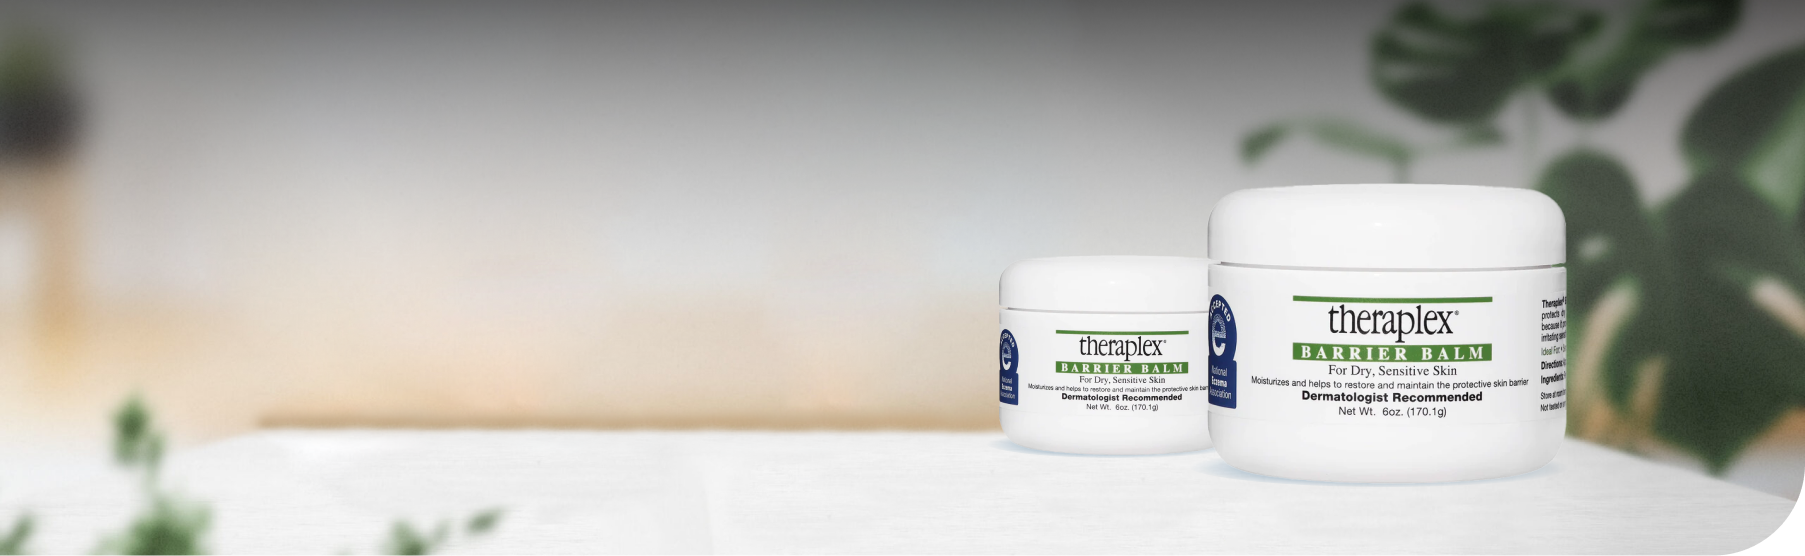 Theraplex Barrier Balm is back in stock